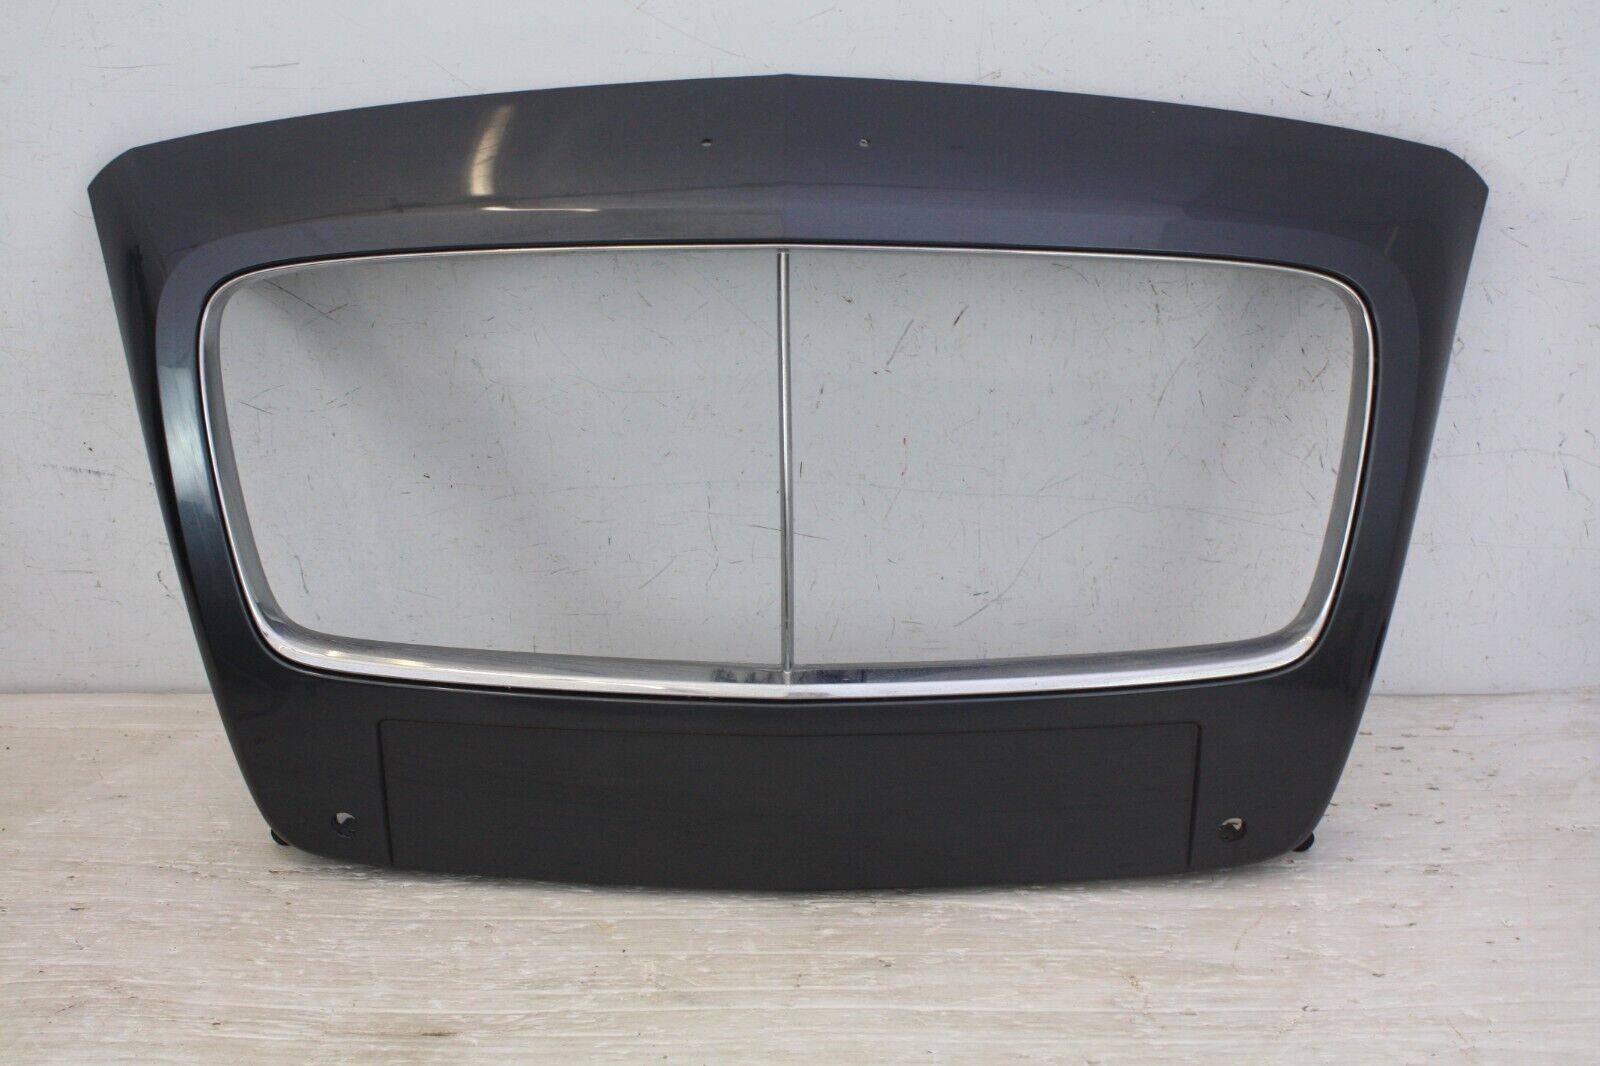 Bentley-Continental-GT-GTC-Front-Grill-Surround-3W3853653-Genuine-2011-175913121734